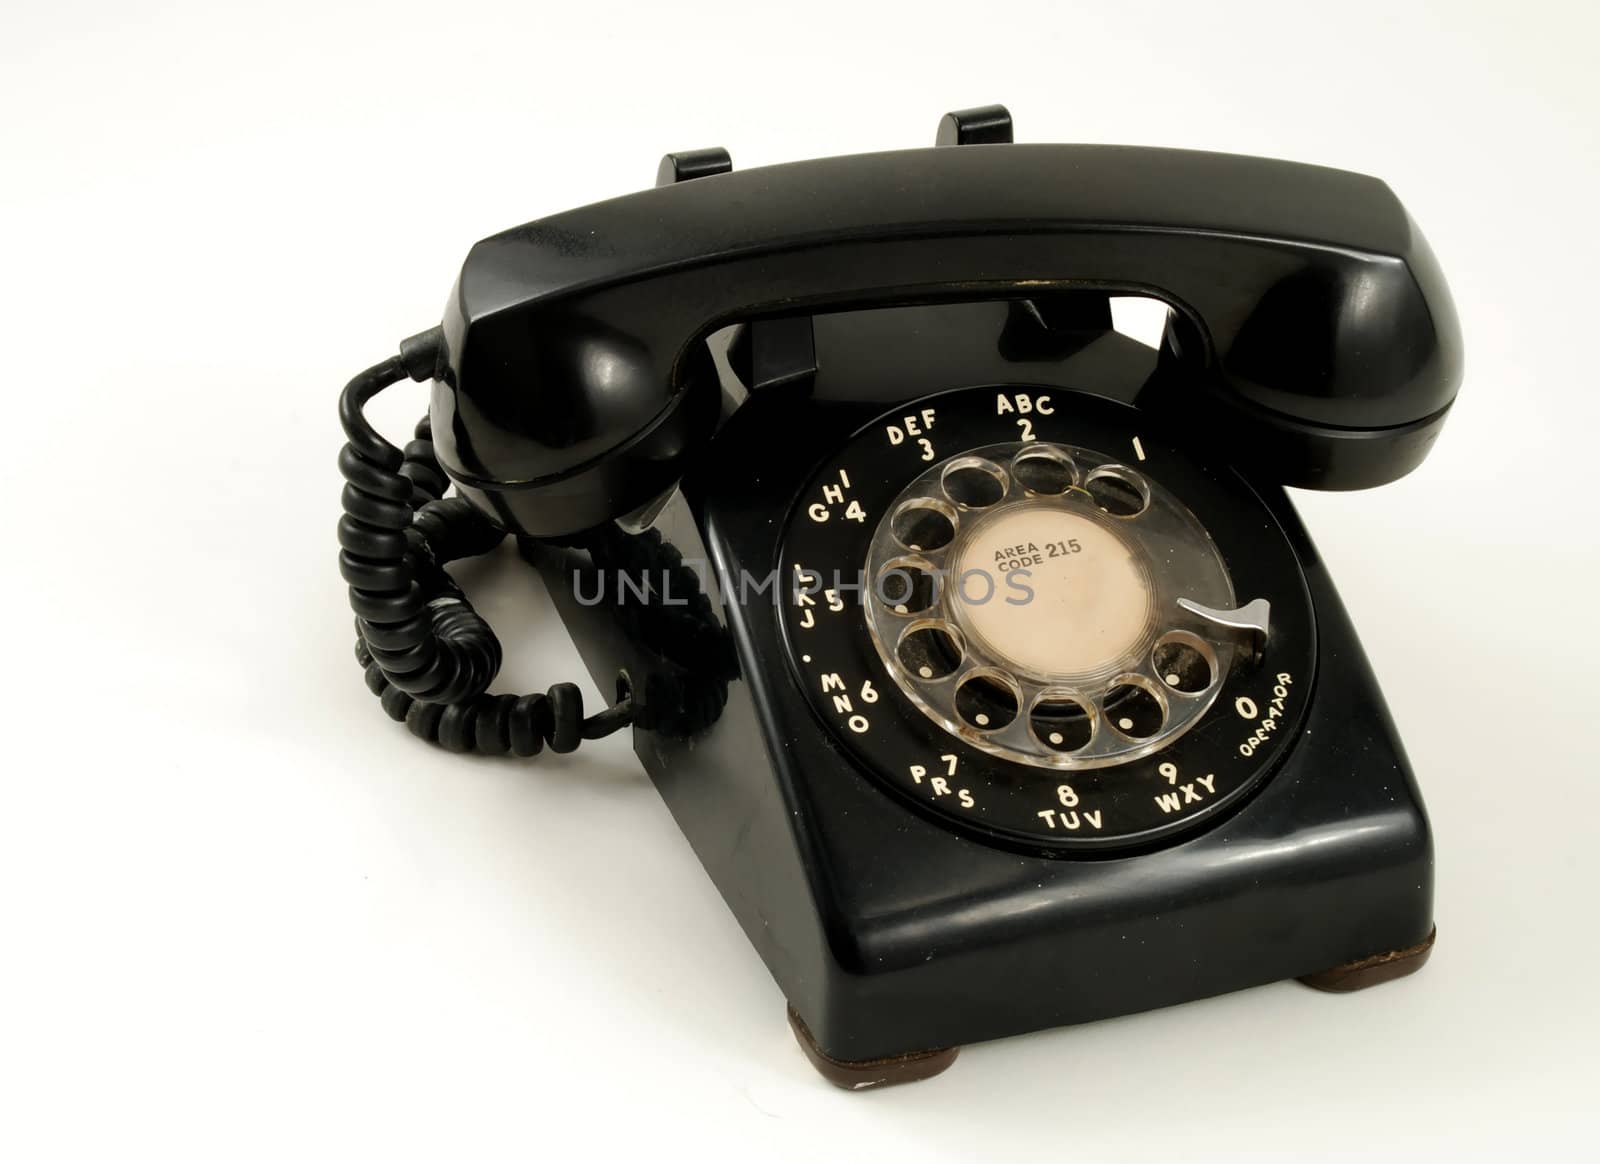 Pictures of an older, analog type telephone